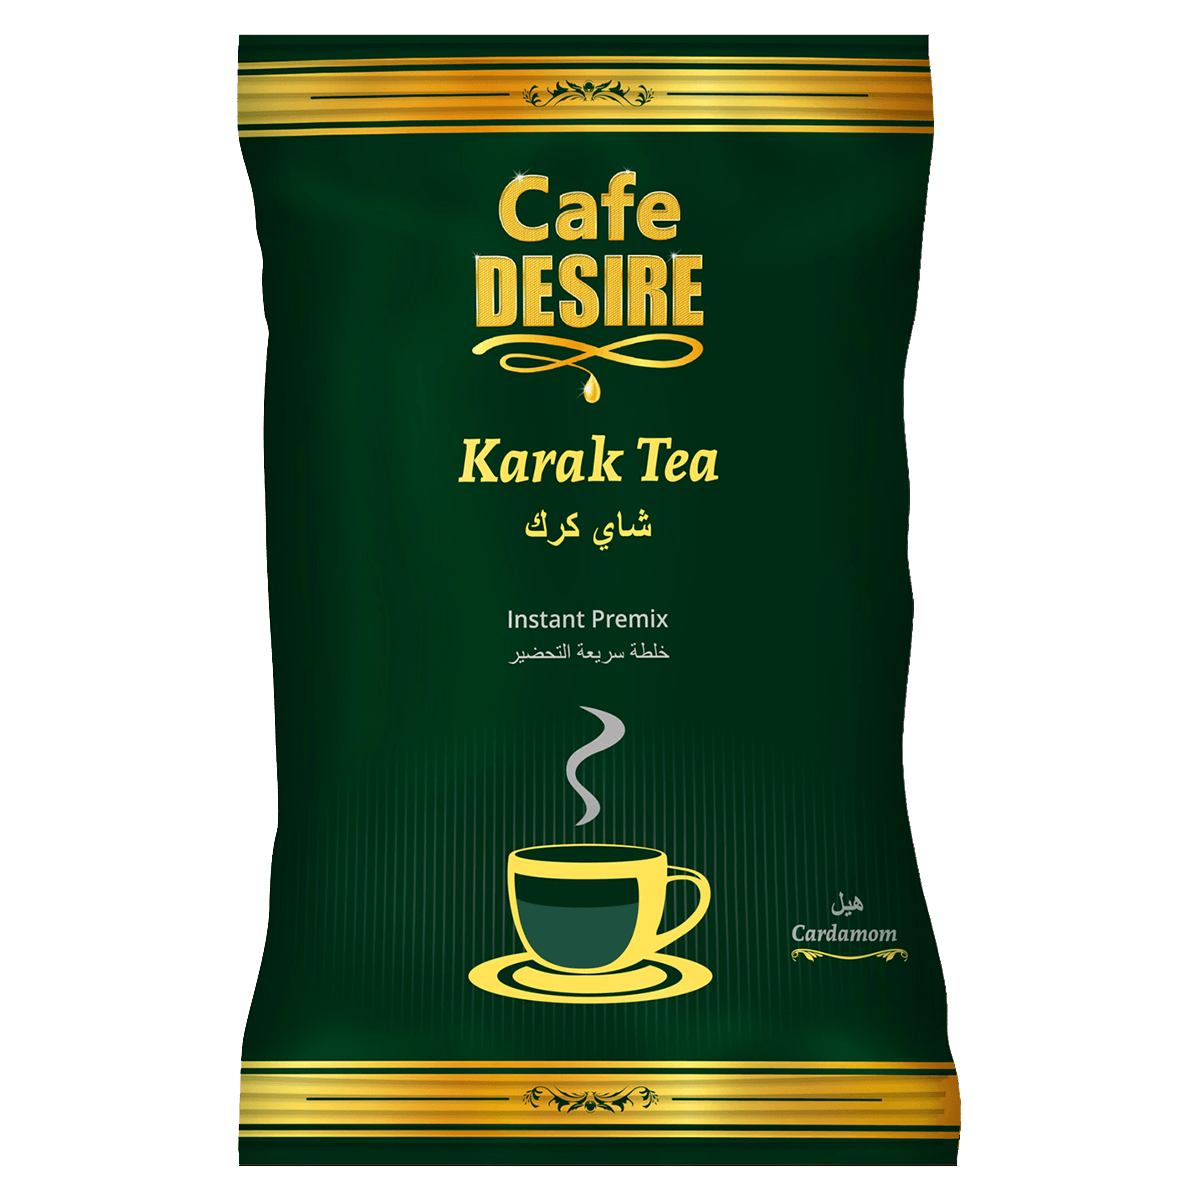 Kadak Cardamom Tea Premix (1Kg) | 3 in 1 Tea | Makes 80 Cups | | Milk not required | Cardamom Flavour Imported from Geneva | For Manual Use - Just add Hot Water | Suitable for all Vending Machines - Cafe Desire Cafe Desire Cafe Desire Kadak Cardamom Tea Premix (1Kg) | 3 in 1 Tea | Makes 80 Cups | | Milk not required | Cardamom Flavour Imported from Geneva | For Manual Use - Just add Hot Water | Suitable for all Vending Machines